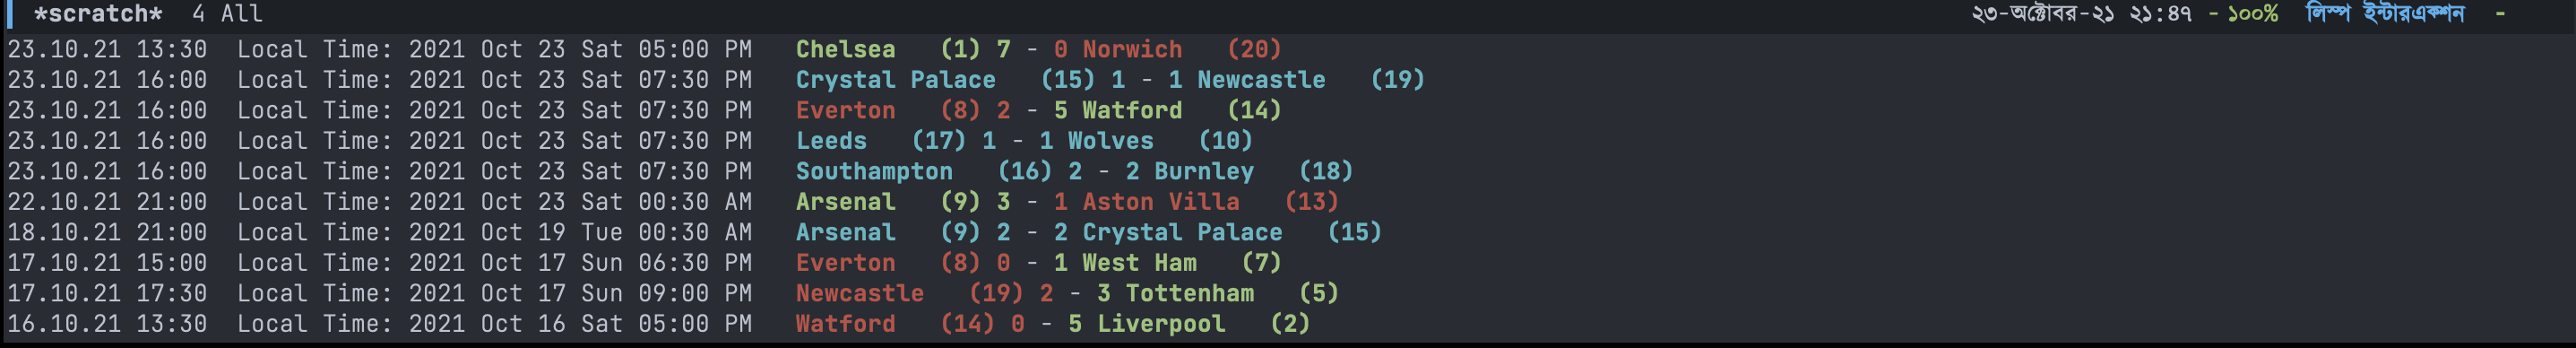 results-all-clubs.png